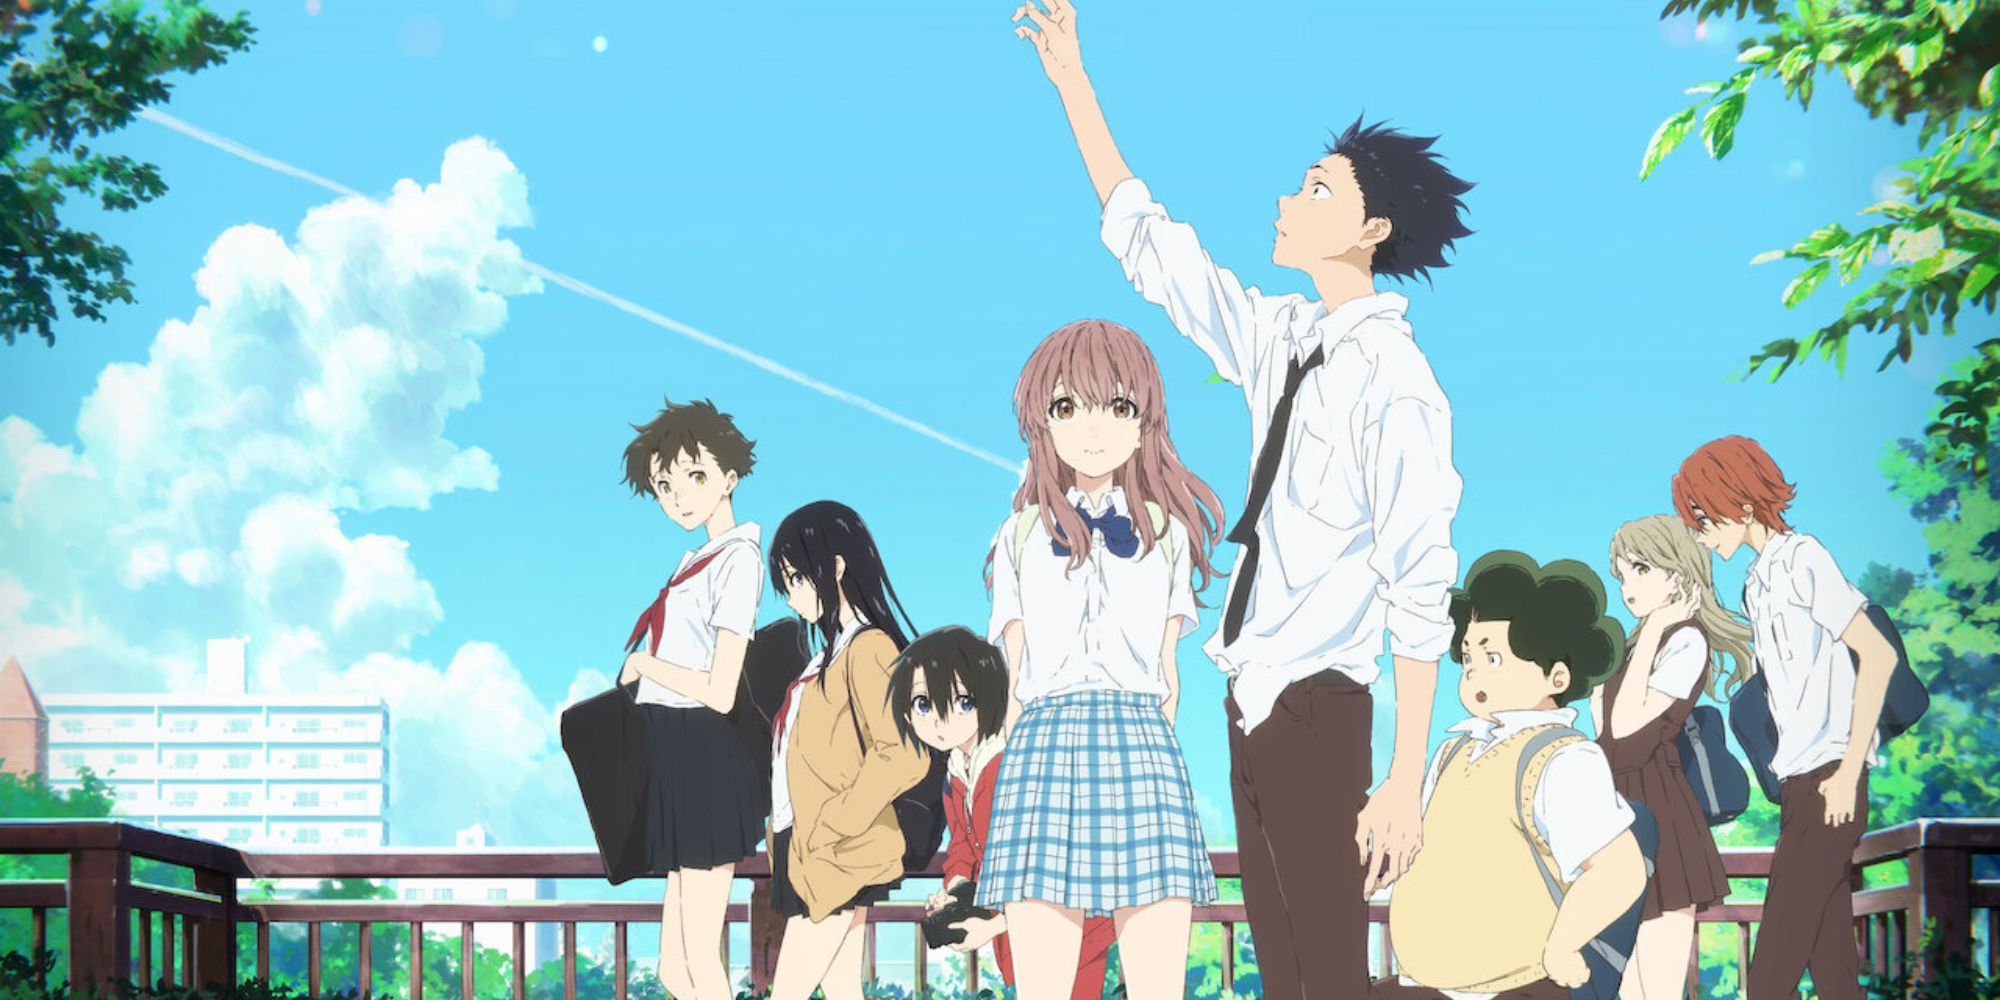 A Silent Voice cast members stand outdoors